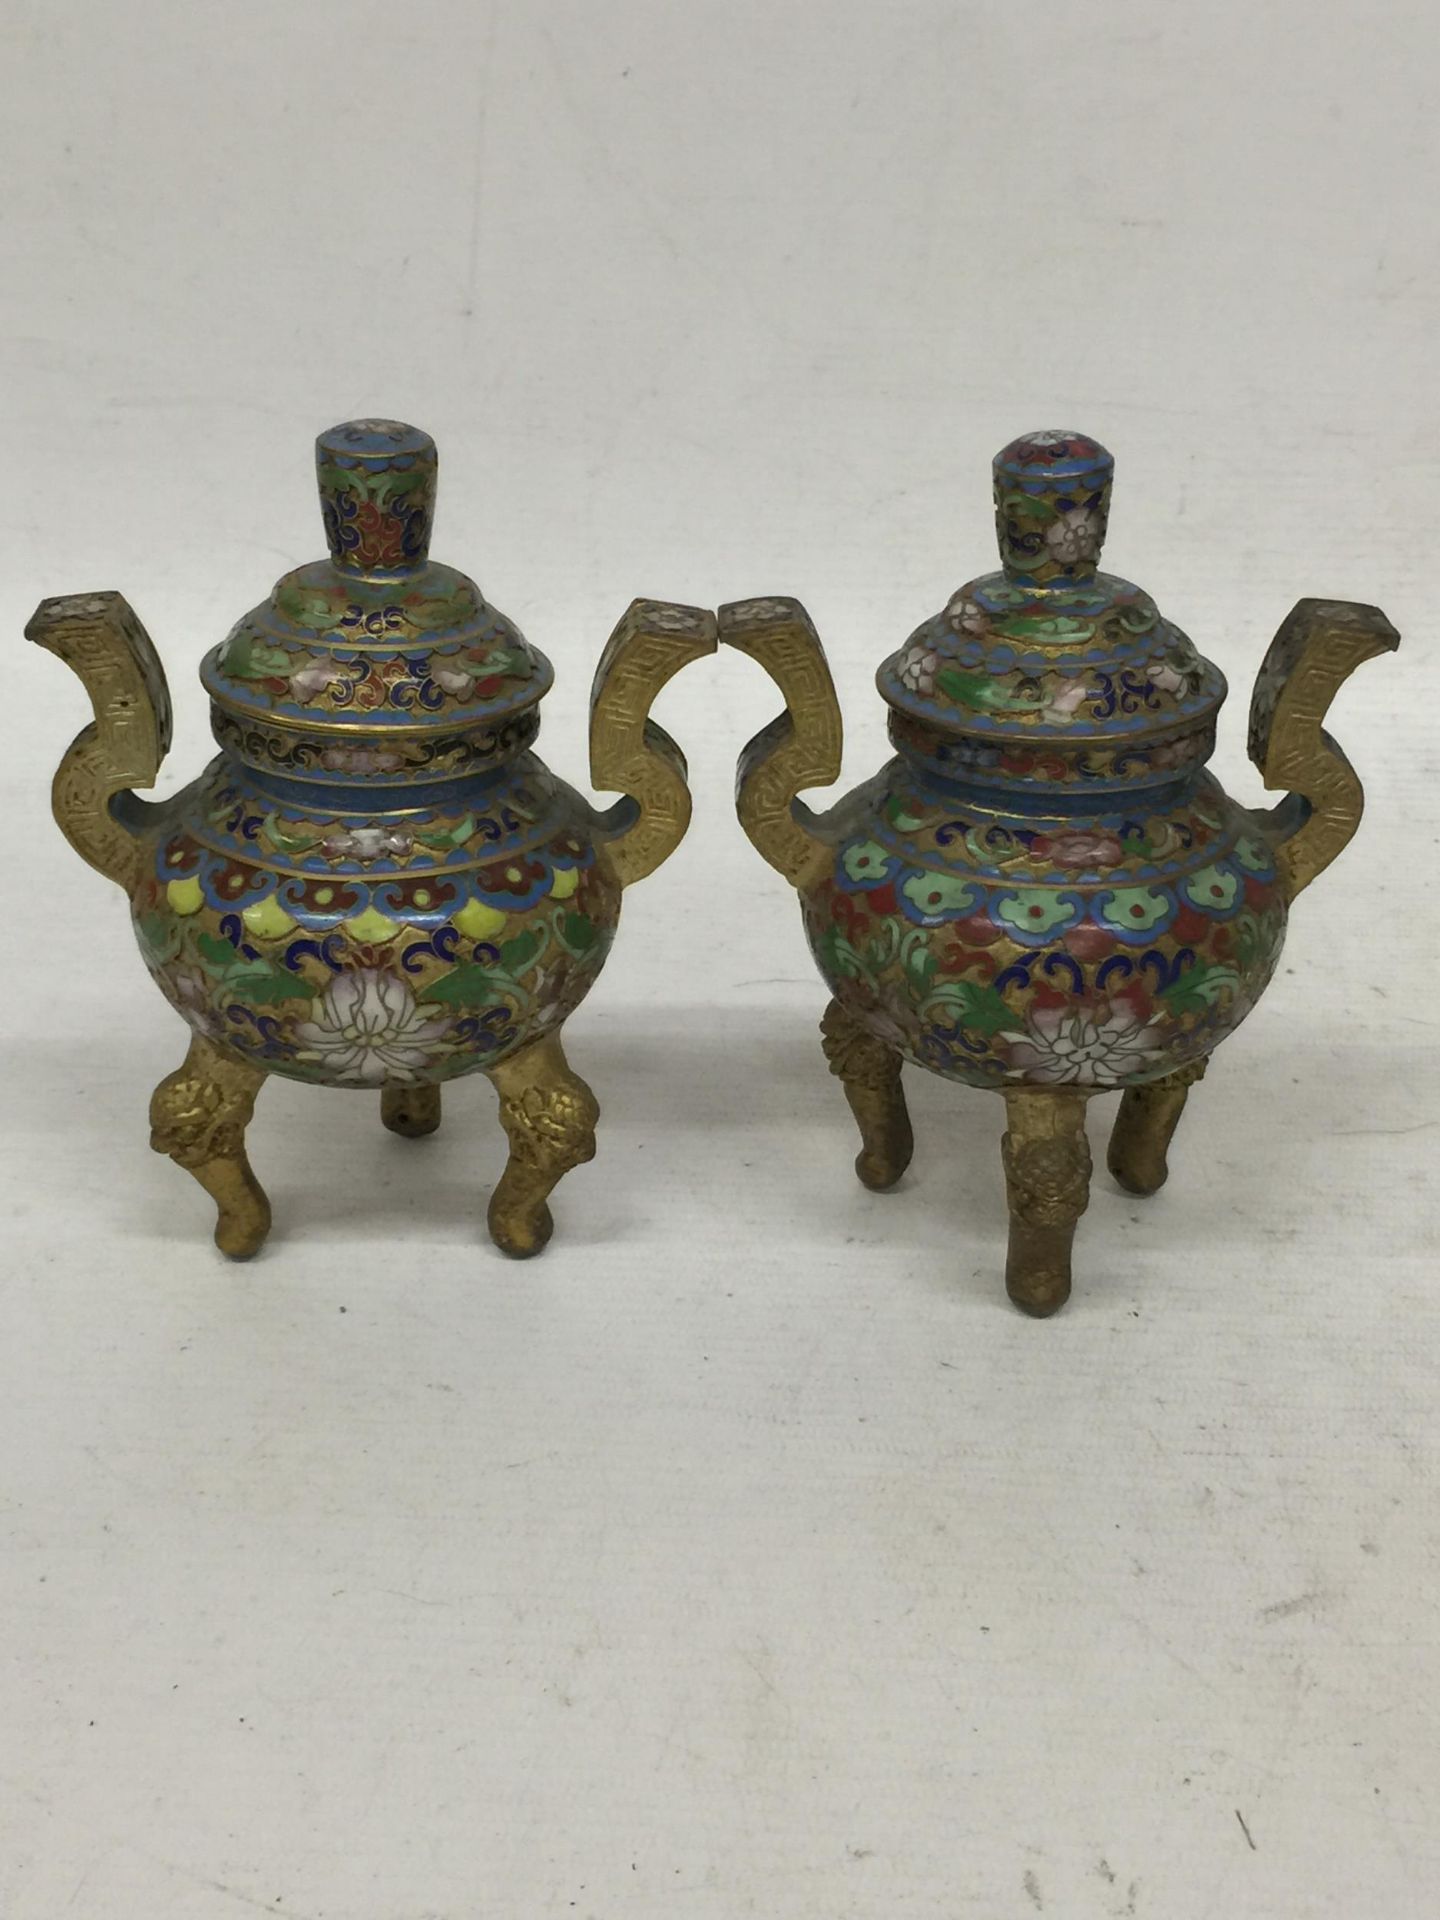 A PAIR OF ORIENTAL CLOISONNE LIDDED SMALL CENSORS